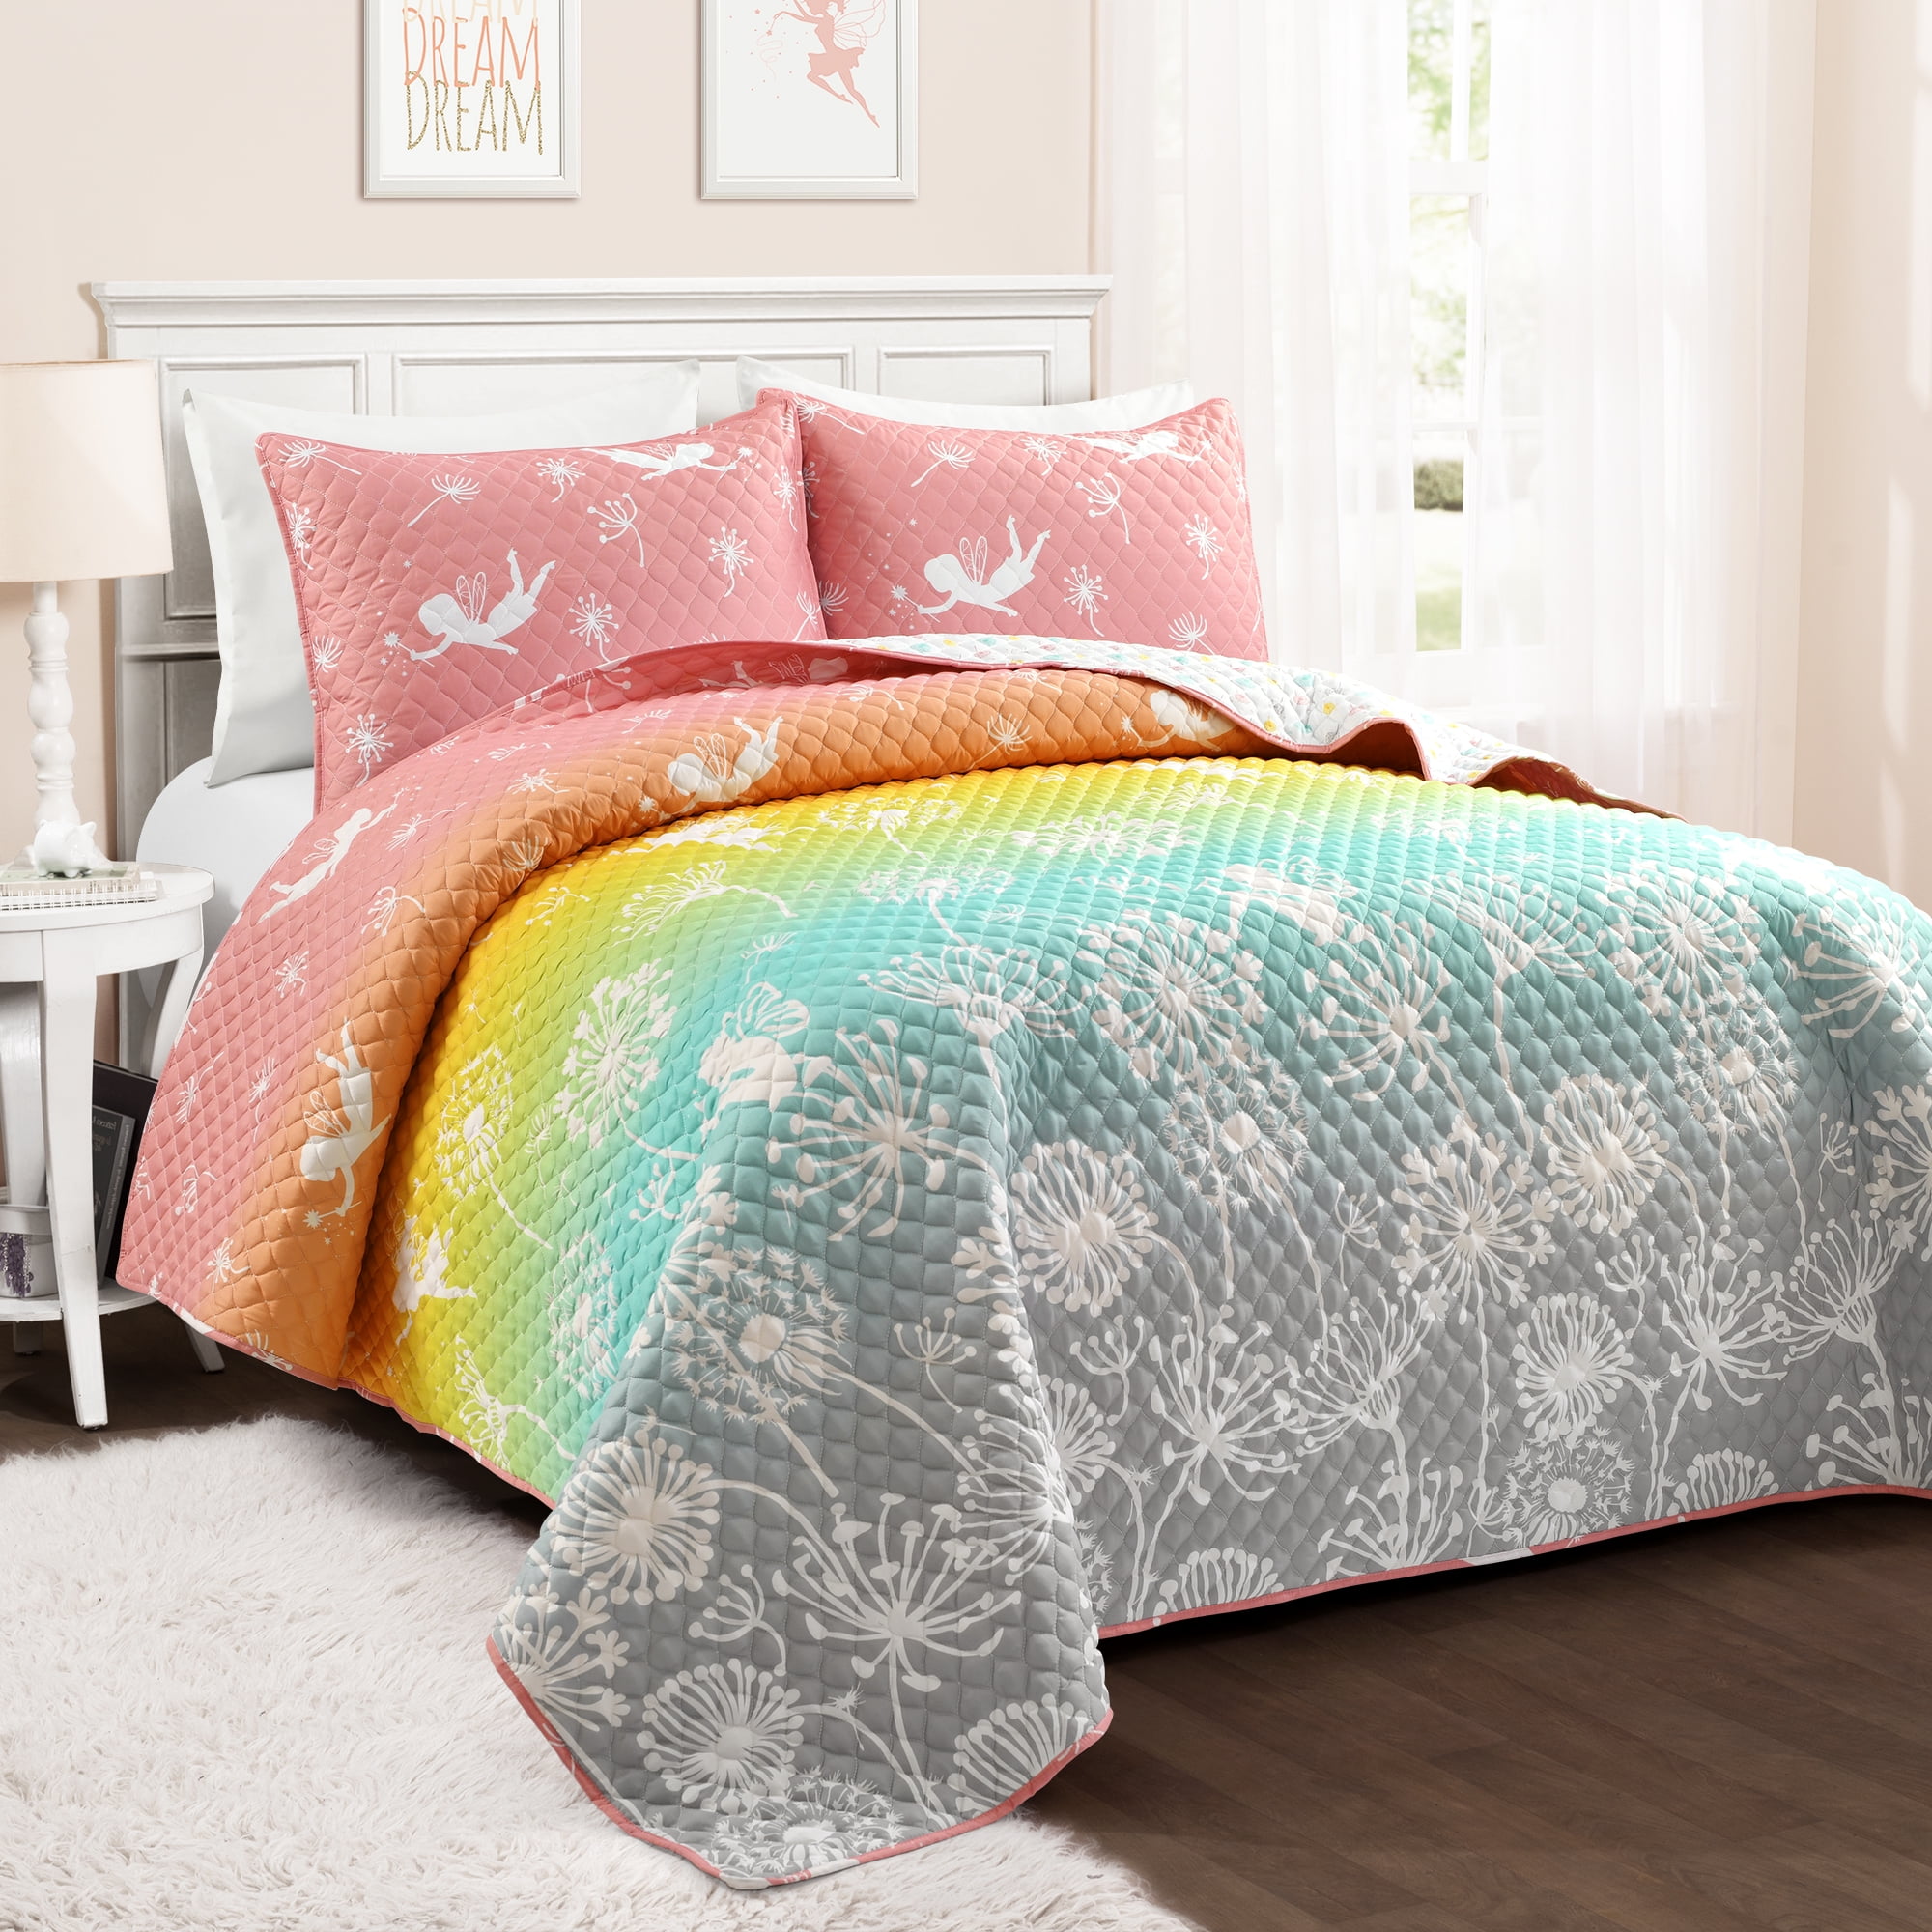 Your Zone Cotton Flannel Full/queen Quilt Set Girl Polar Pink Inc 2 Shams for sale online 